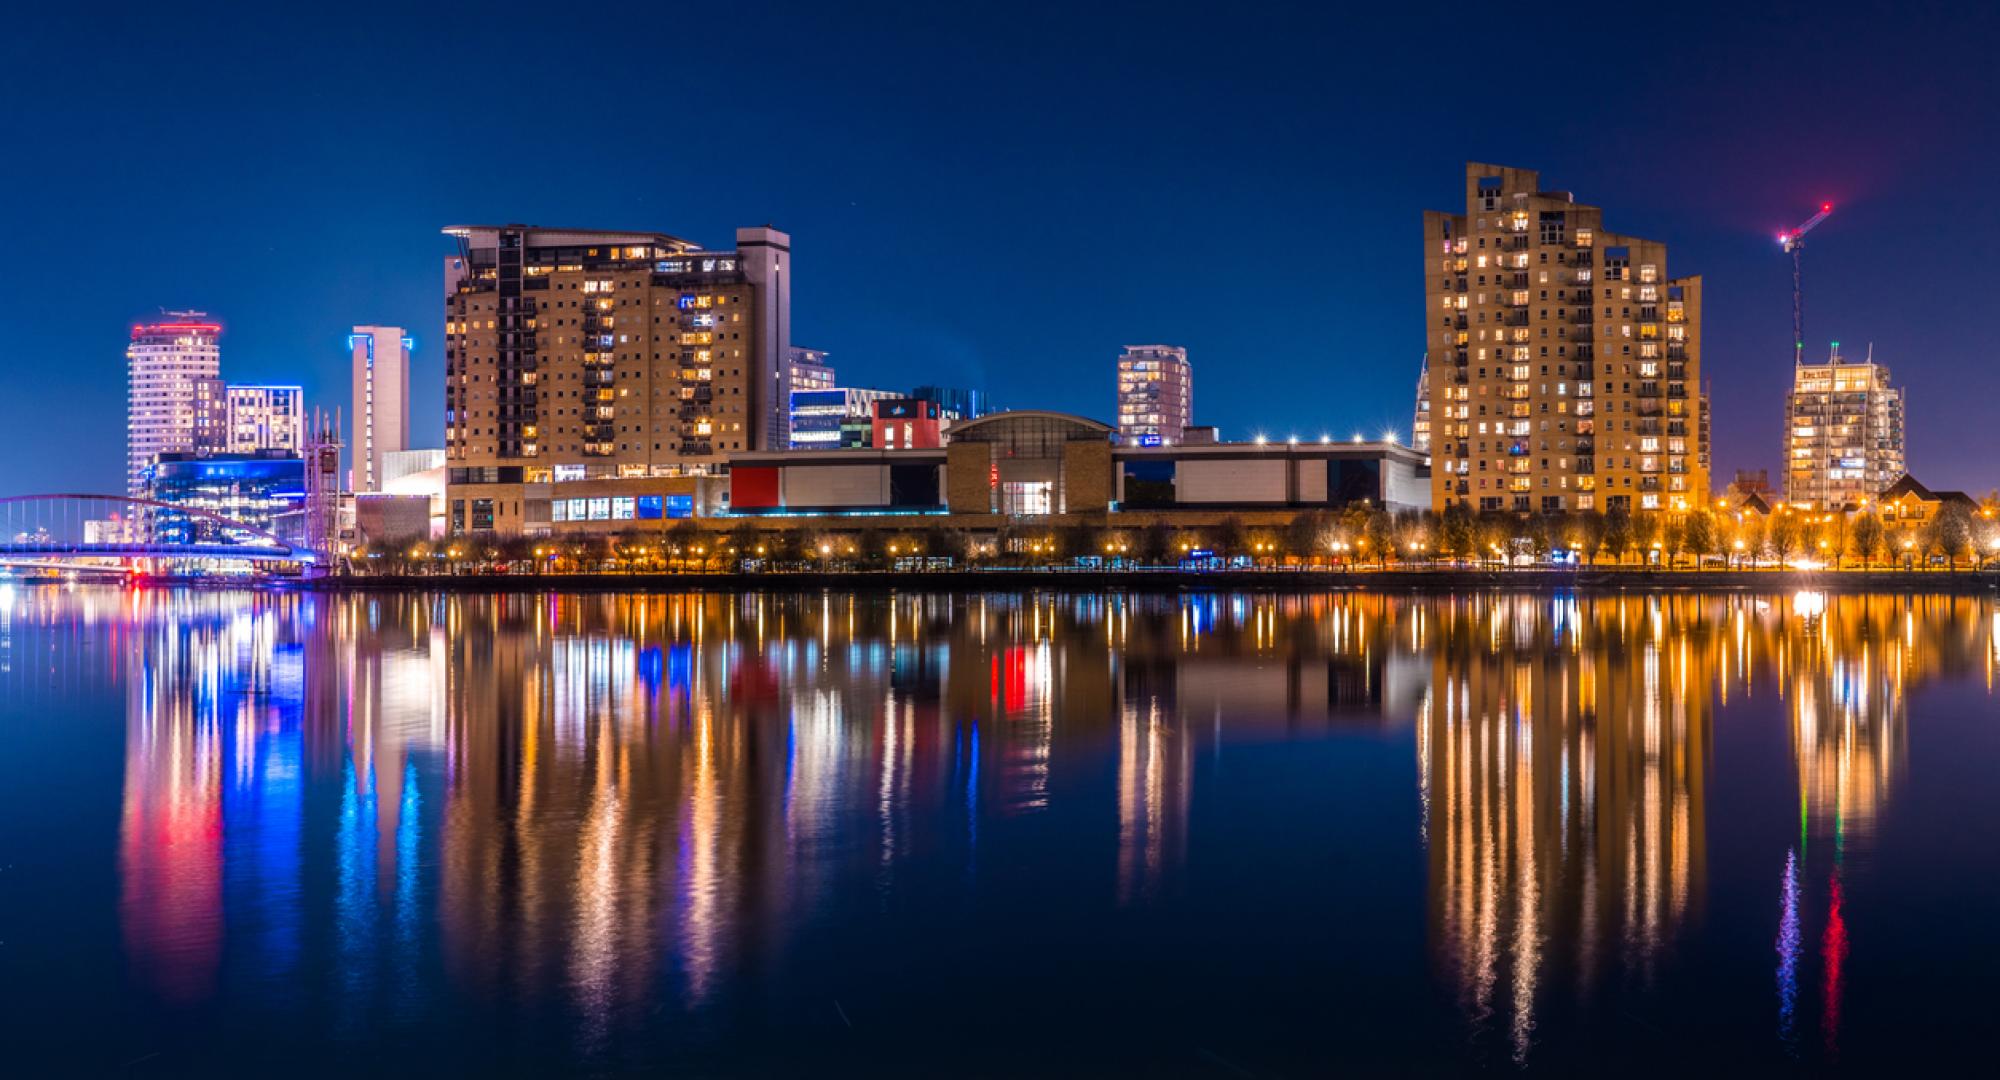 Night view of Salford Quays